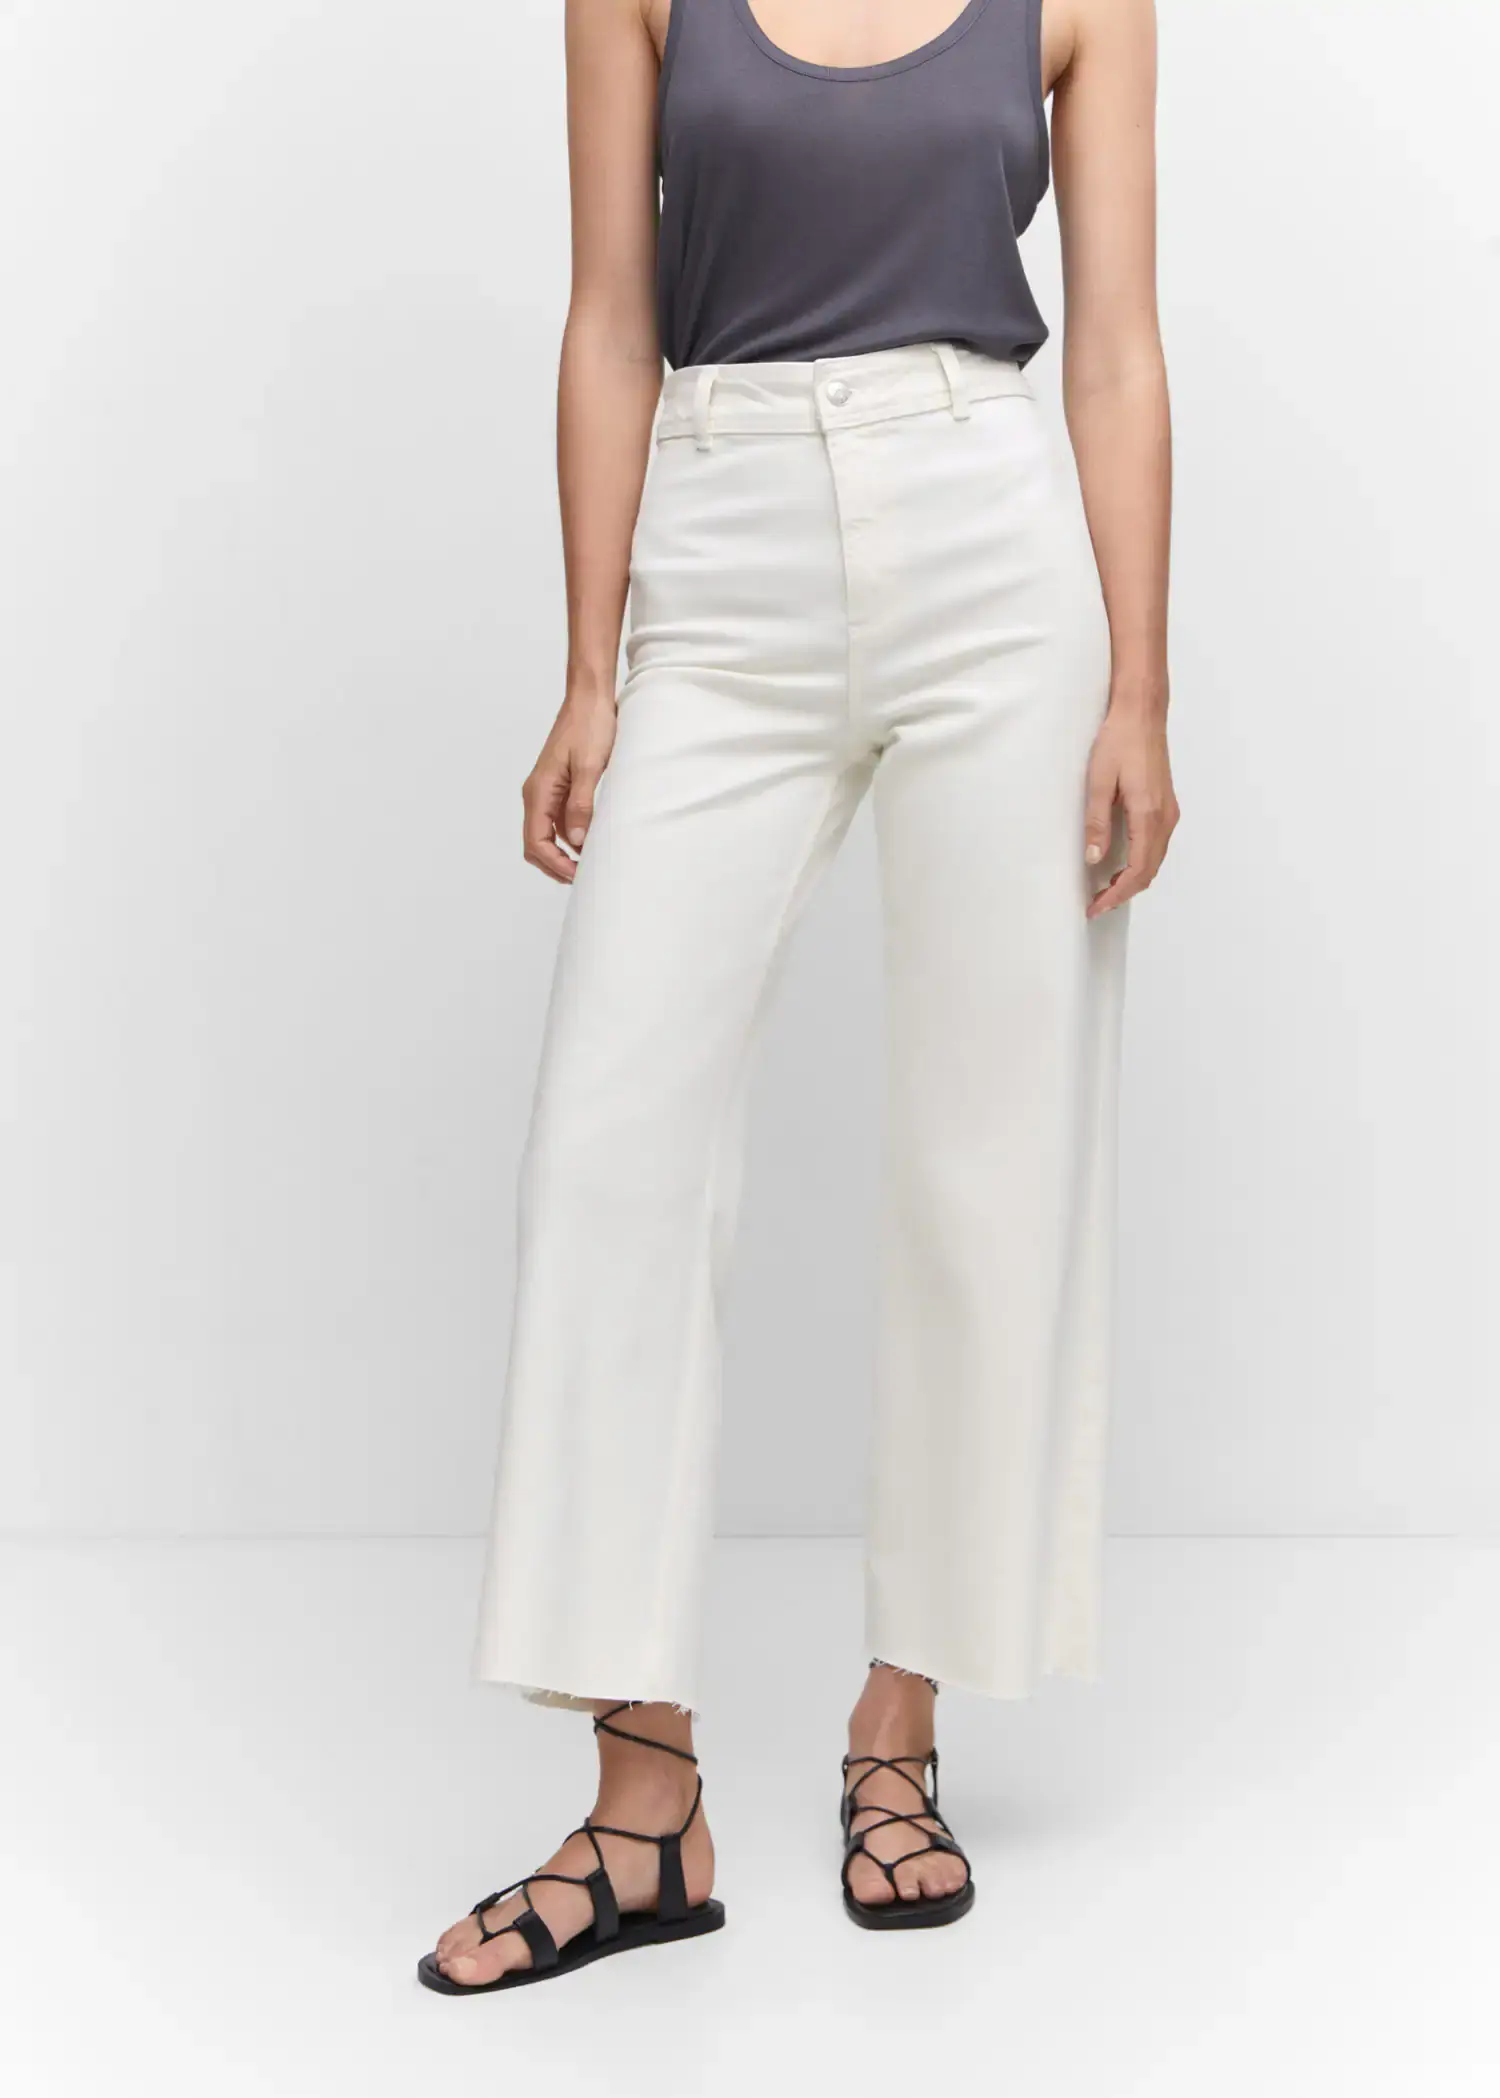 Mango Jeans culotte high waist. a woman in white pants and a black top. 